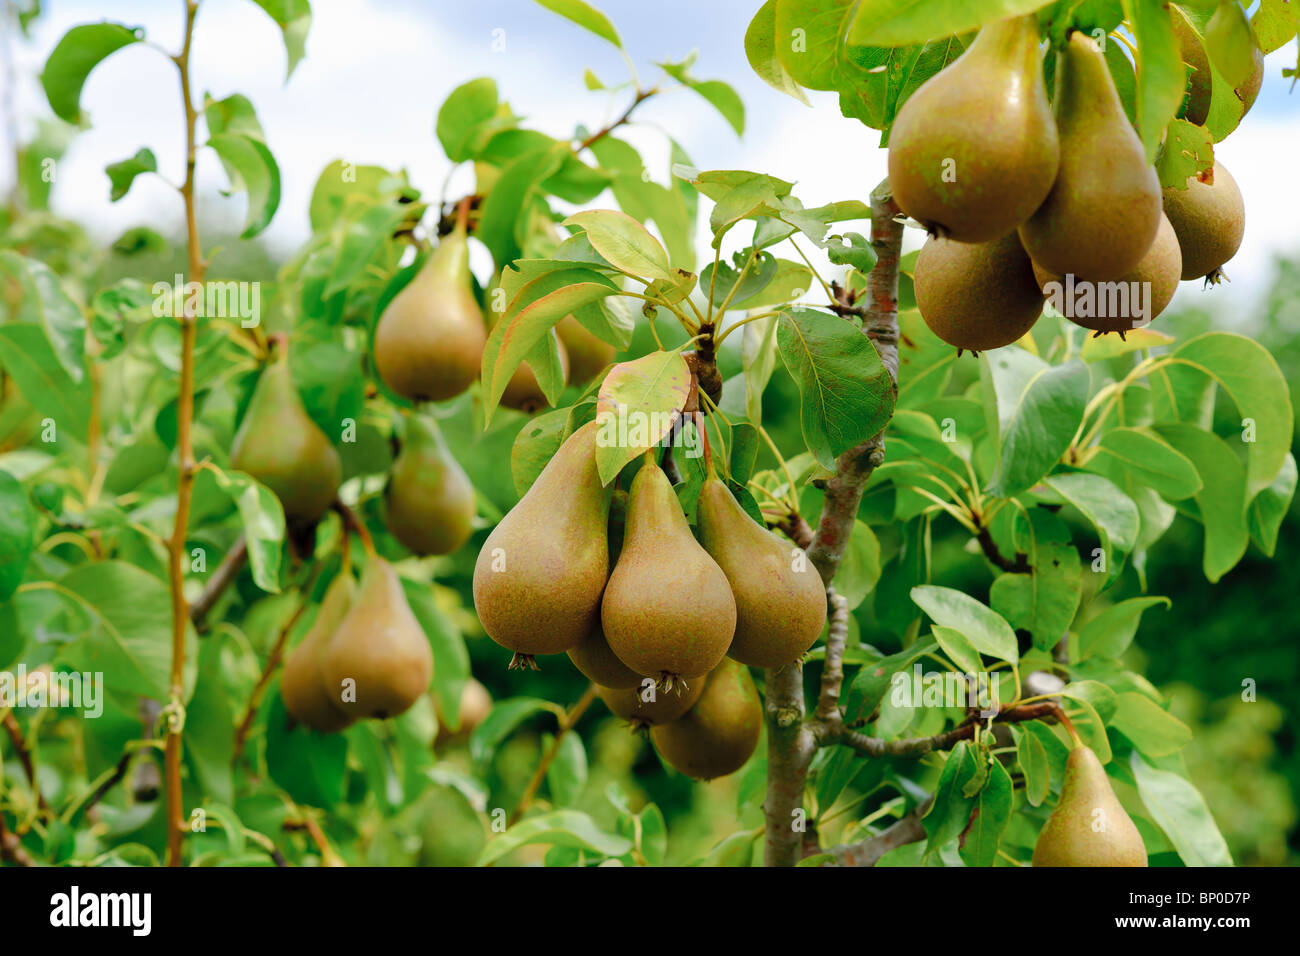 A Pear tree in the English Countryside Stock Photo